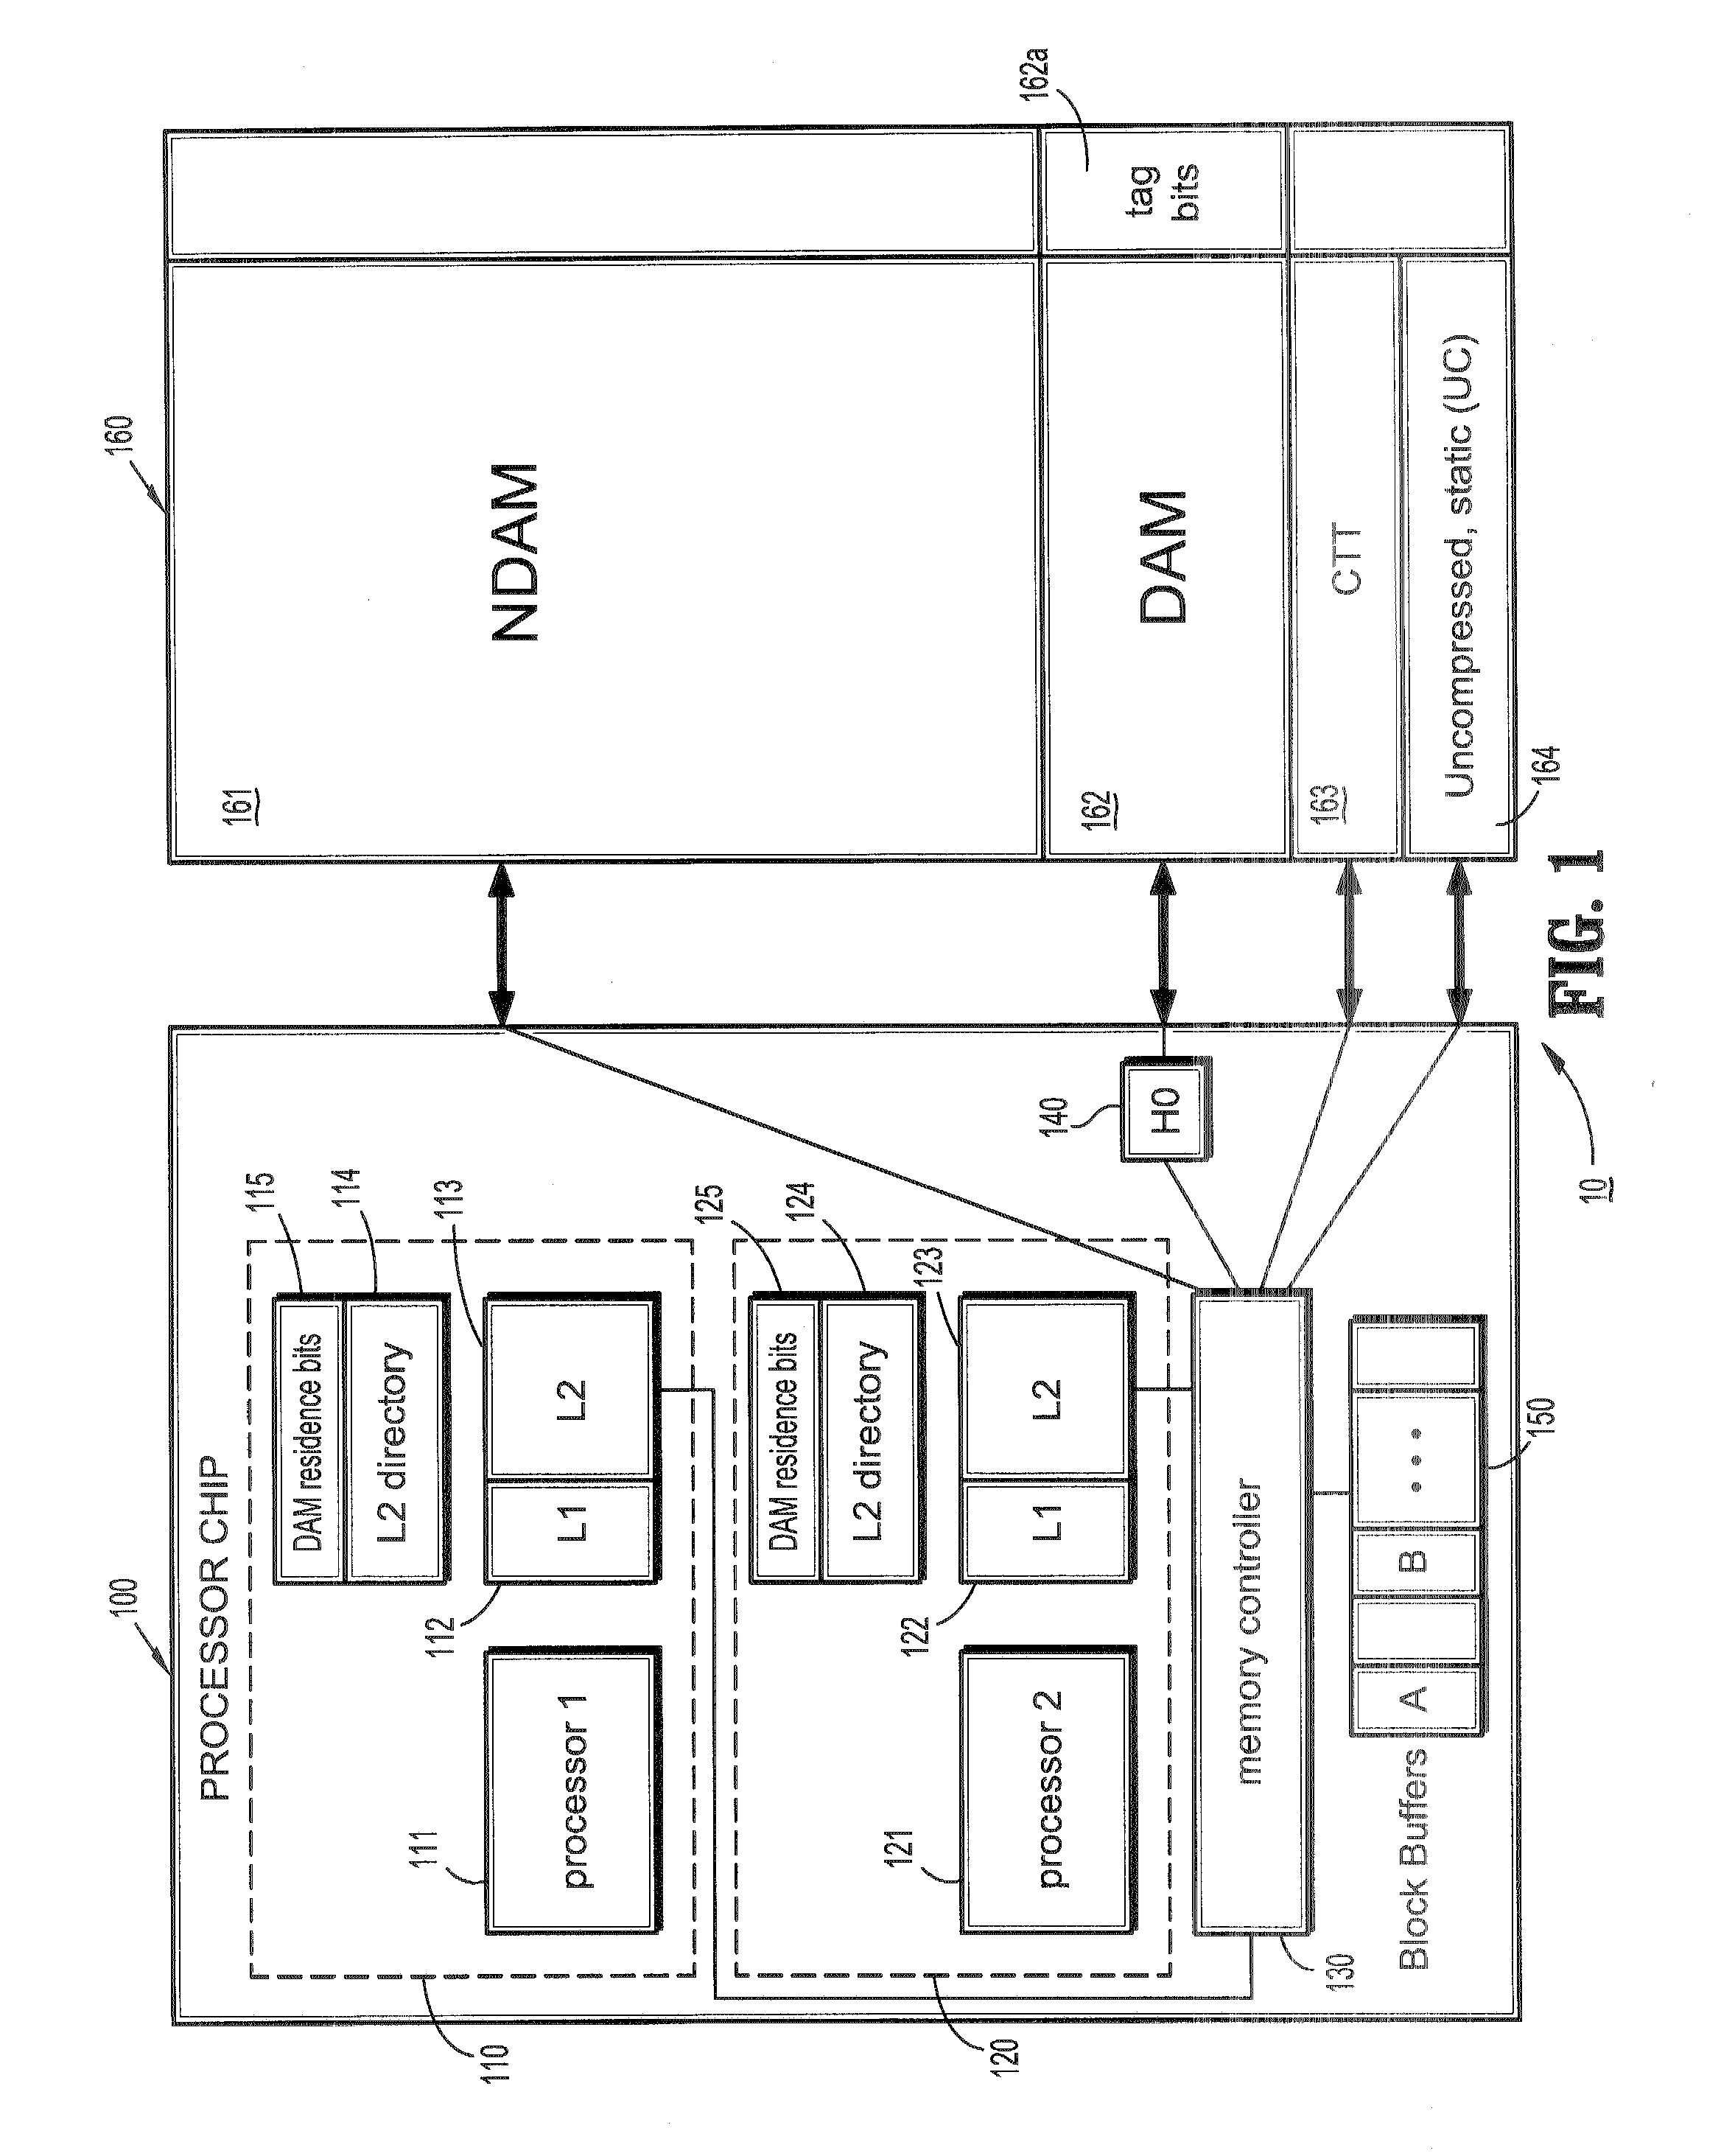 Systems and methods for masking latency of memory reorganization work in a compressed memory system